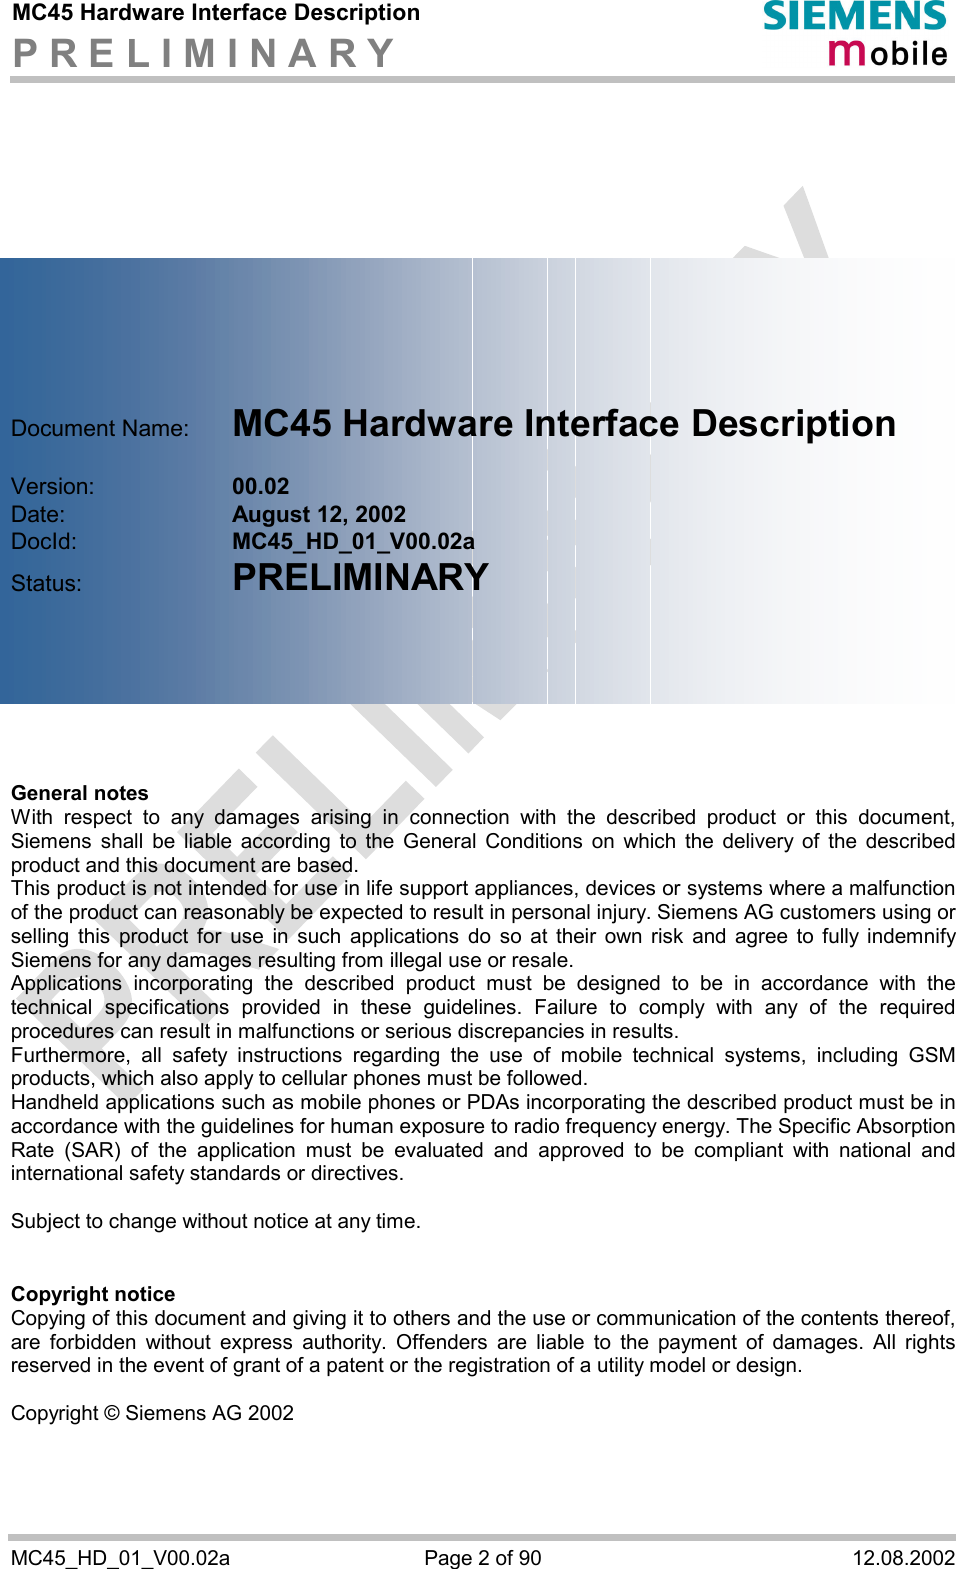 MC45 Hardware Interface Description P R E L I M I N A R Y      MC45_HD_01_V00.02a  Page 2 of 90  12.08.2002            Document Name:   MC45 Hardware Interface Description  Version:     00.02 Date:       August 12, 2002 DocId:     MC45_HD_01_V00.02a Status:     PRELIMINARY        General notes With respect to any damages arising in connection with the described product or this document, Siemens shall be liable according to the General Conditions on which the delivery of the described product and this document are based. This product is not intended for use in life support appliances, devices or systems where a malfunction of the product can reasonably be expected to result in personal injury. Siemens AG customers using or selling this product for use in such applications do so at their own risk and agree to fully indemnify Siemens for any damages resulting from illegal use or resale. Applications incorporating the described product must be designed to be in accordance with the technical specifications provided in these guidelines. Failure to comply with any of the required procedures can result in malfunctions or serious discrepancies in results.  Furthermore, all safety instructions regarding the use of mobile technical systems, including GSM products, which also apply to cellular phones must be followed.  Handheld applications such as mobile phones or PDAs incorporating the described product must be in accordance with the guidelines for human exposure to radio frequency energy. The Specific Absorption Rate (SAR) of the application must be evaluated and approved to be compliant with national and international safety standards or directives.  Subject to change without notice at any time.   Copyright notice Copying of this document and giving it to others and the use or communication of the contents thereof, are forbidden without express authority. Offenders are liable to the payment of damages. All rights reserved in the event of grant of a patent or the registration of a utility model or design.  Copyright © Siemens AG 2002  